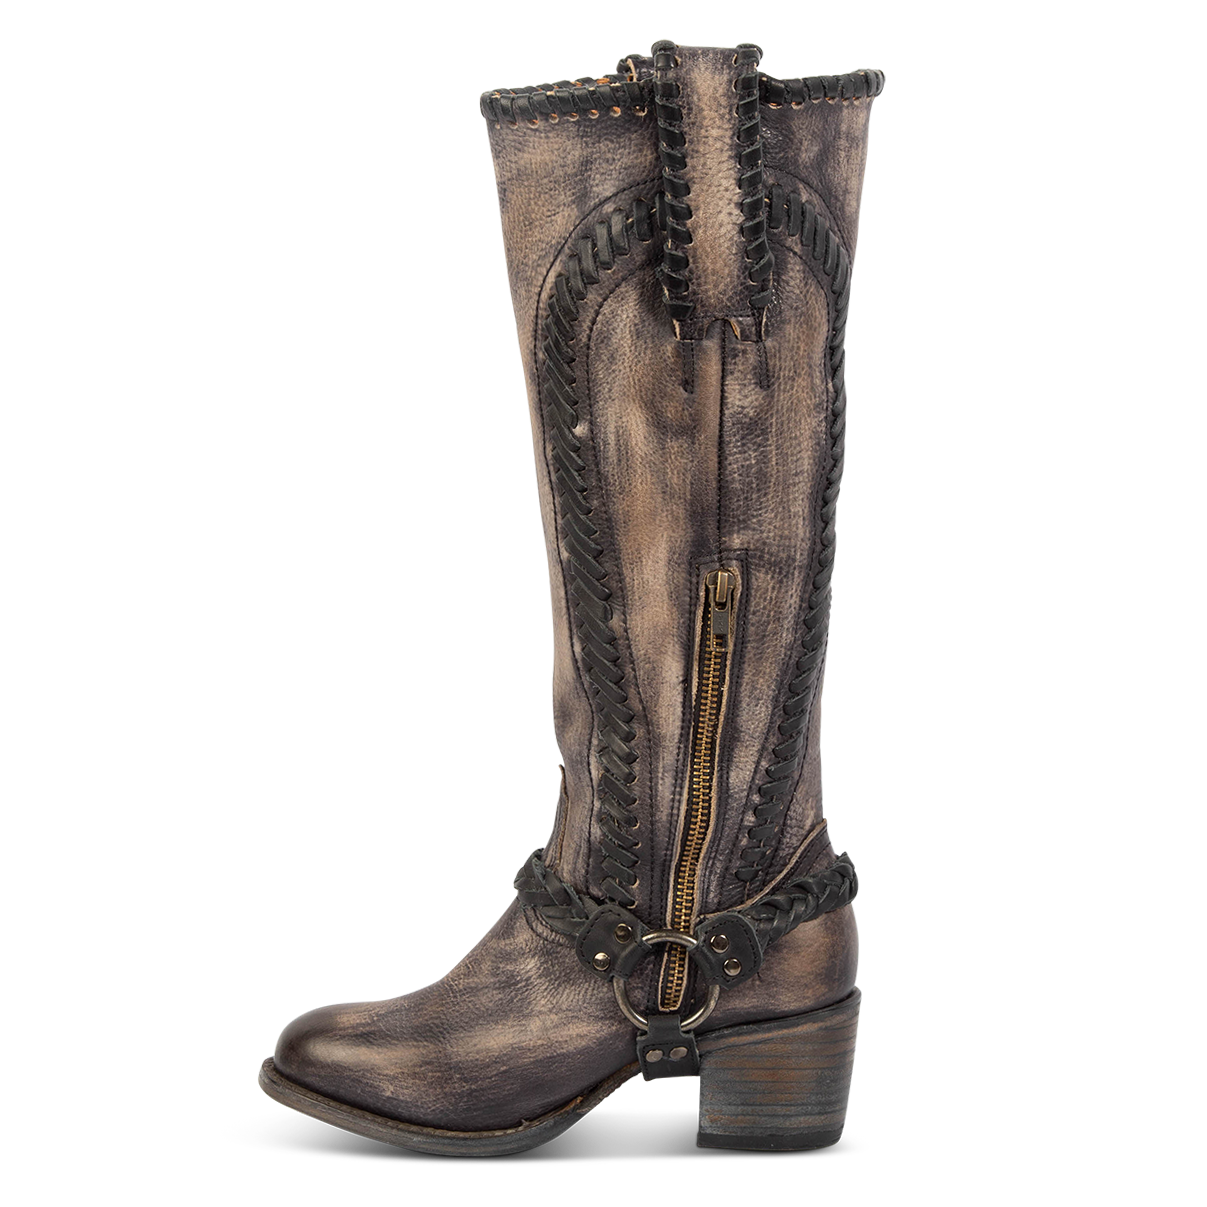 Side view showing leather pull straps, inside working brass zipper, and braided ankle harness on FREEBIRD women's Clover black leather boot